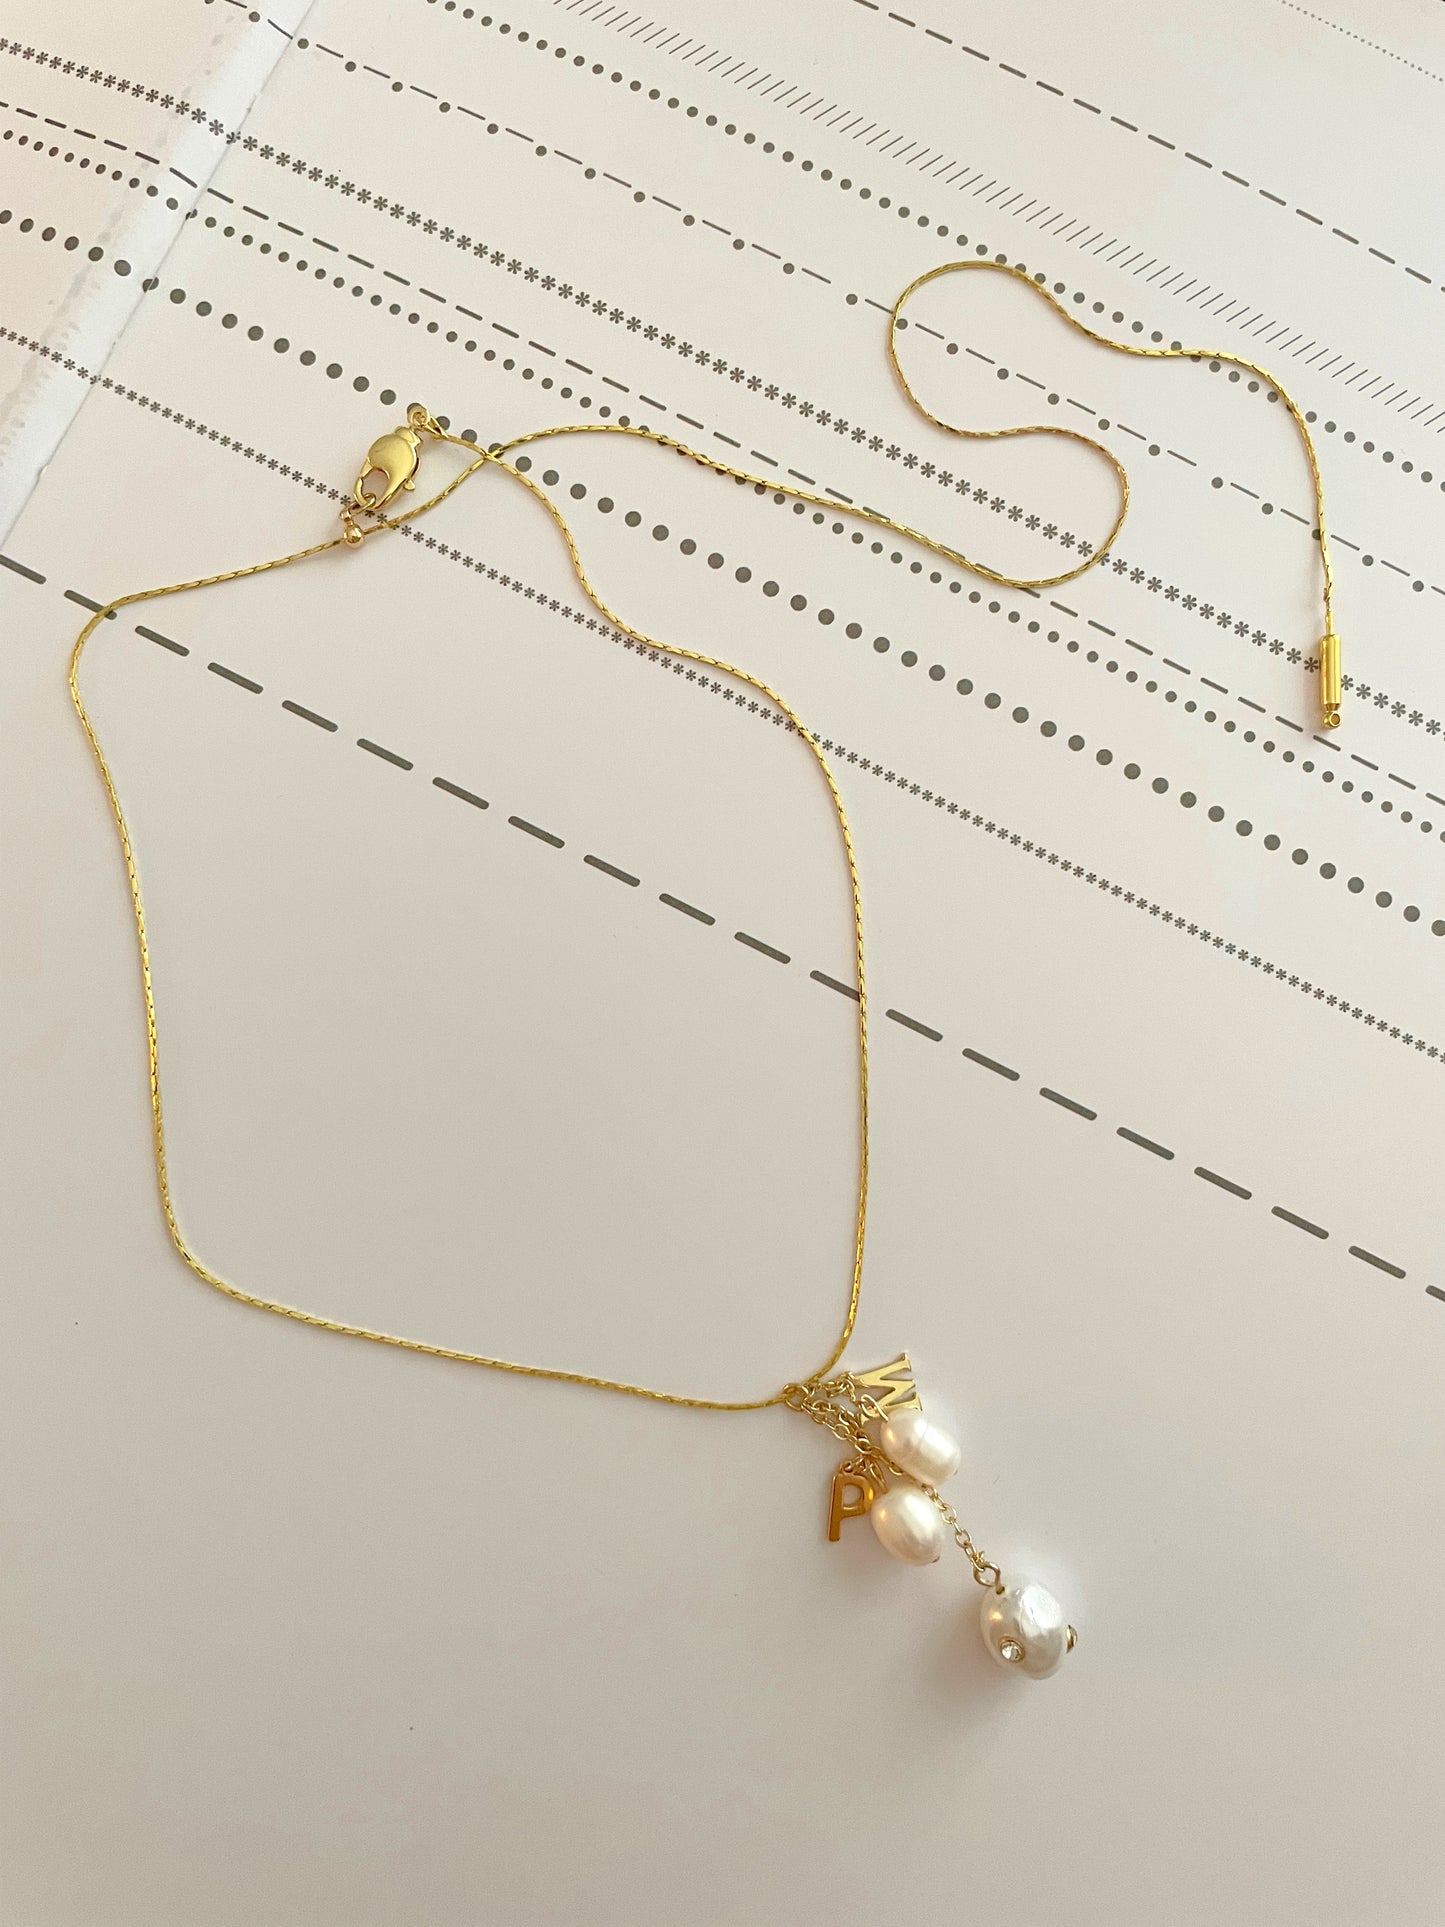 Generations Necklace - Pearls